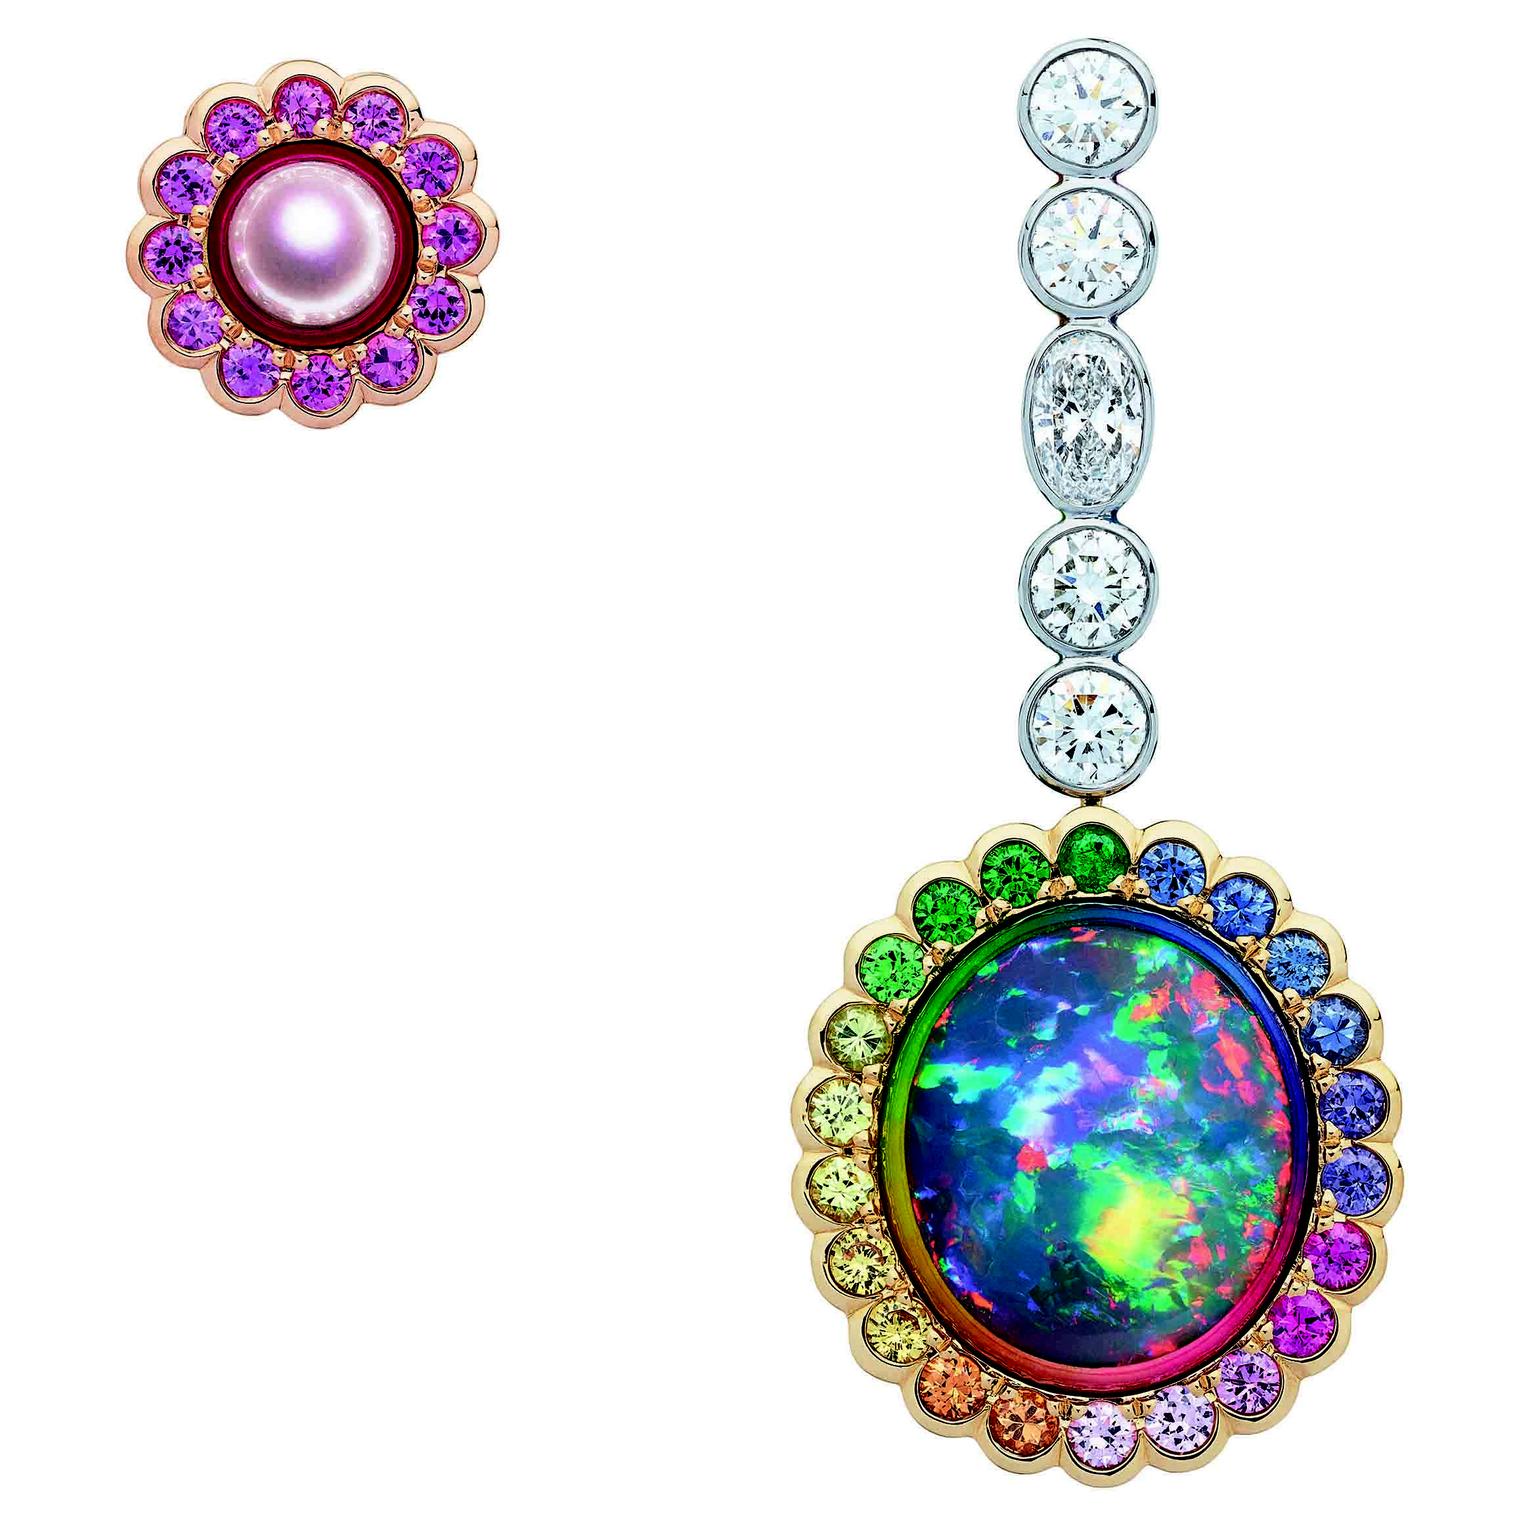 Mismatched Dior et Moi black opal and pink pearl earrings